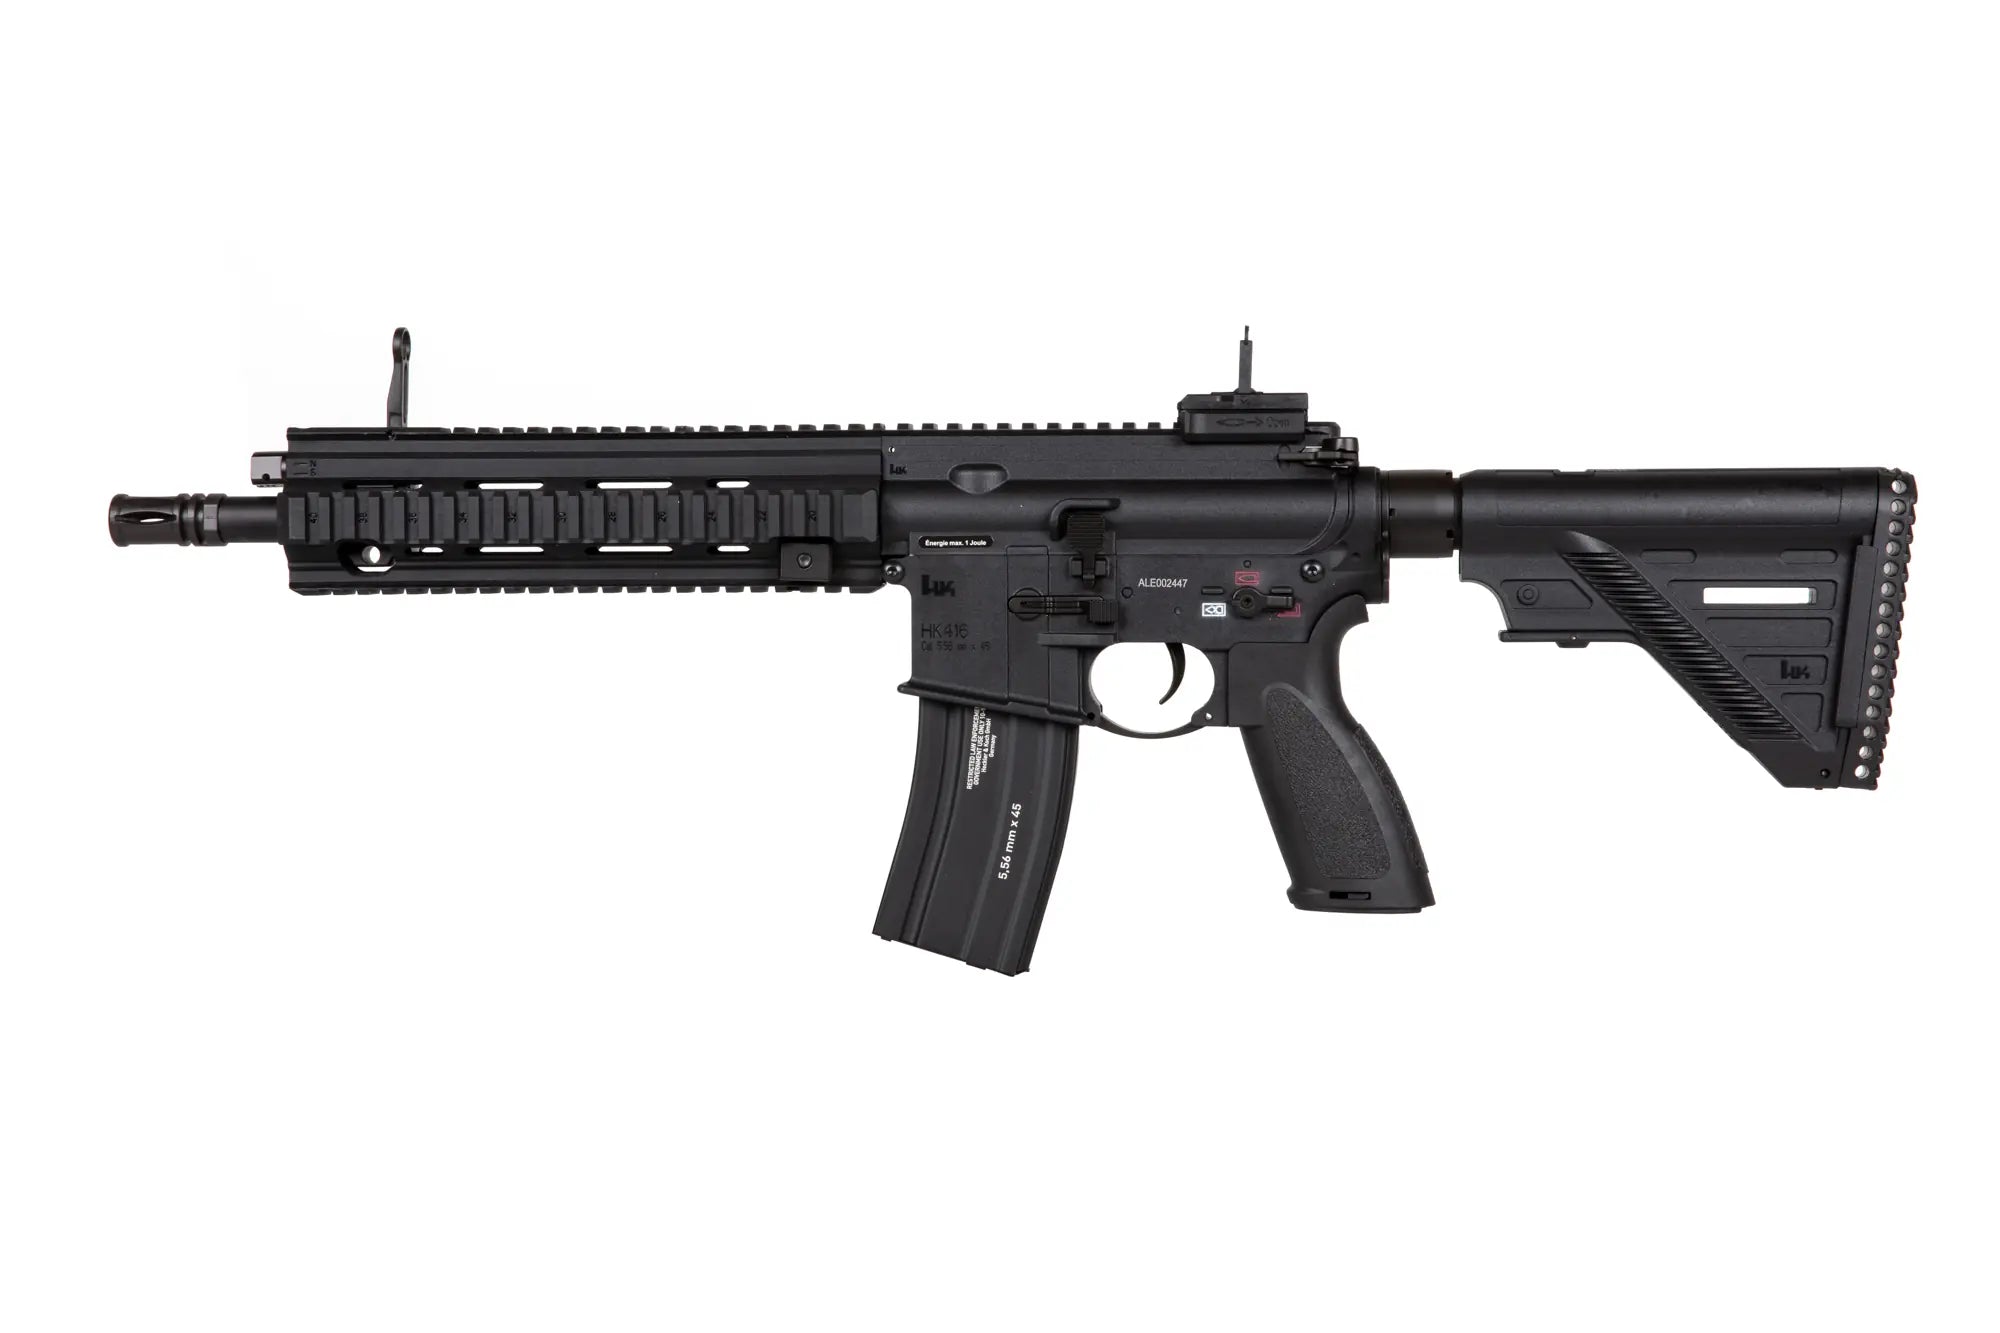  HK416A5 Airsoft Electric Rifle